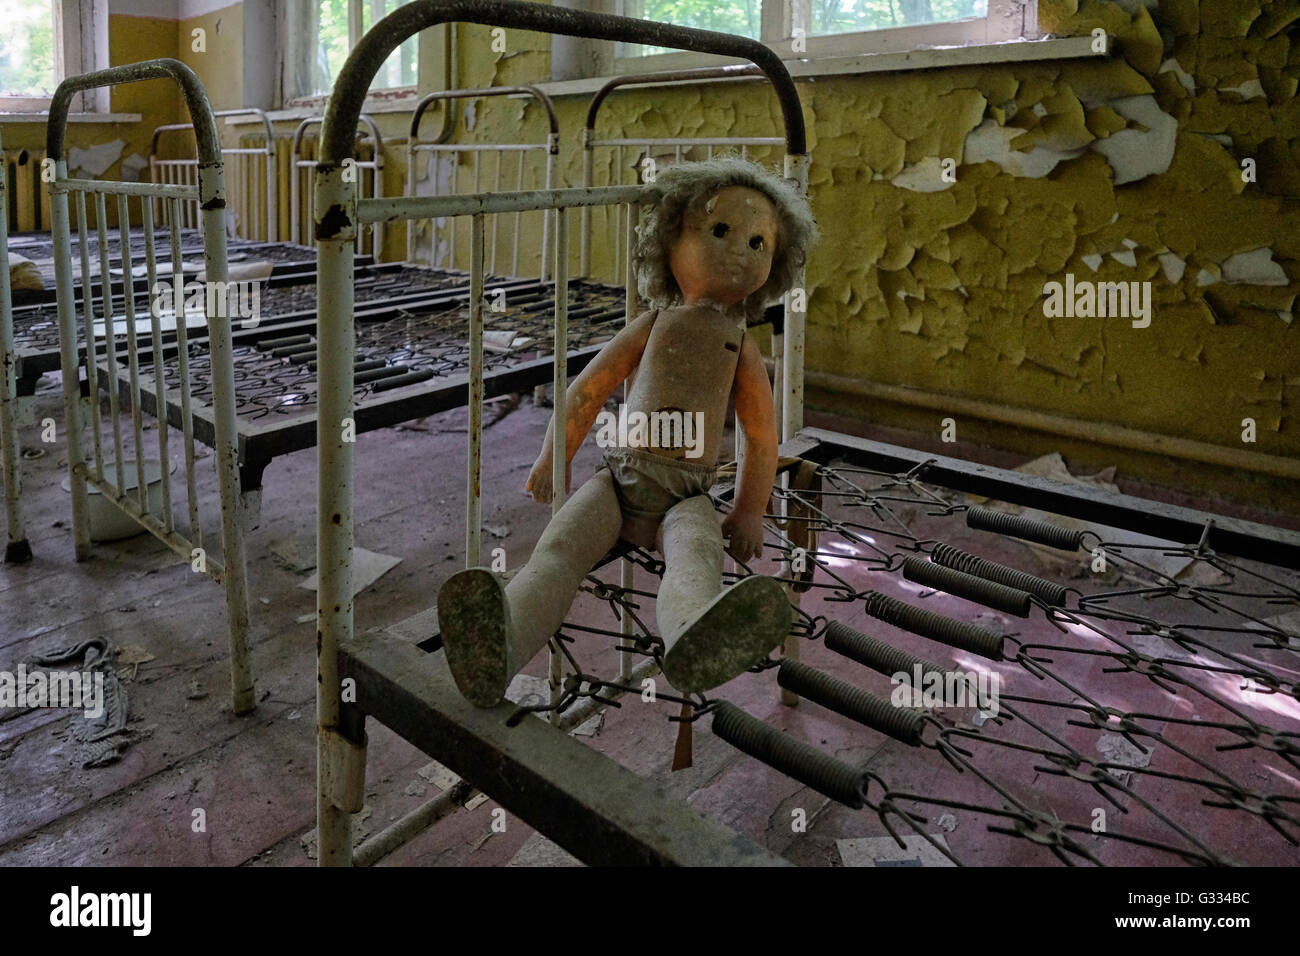 A doll lies among children's beds standing in the abandoned kindergarten of the deserted village of Kopachi which is still radioactive and contains high levels of plutonium, strontium-90 and caesium-137 located inside the Chernobyl Exclusion Zone in Ukraine on 04 June 2016. The Chernobyl accident occurred on 26 April 1986 at the Chernobyl Nuclear Power Plant in the city of Pripyat and was the worst nuclear power plant accident in history in terms of cost and casualties. Stock Photo